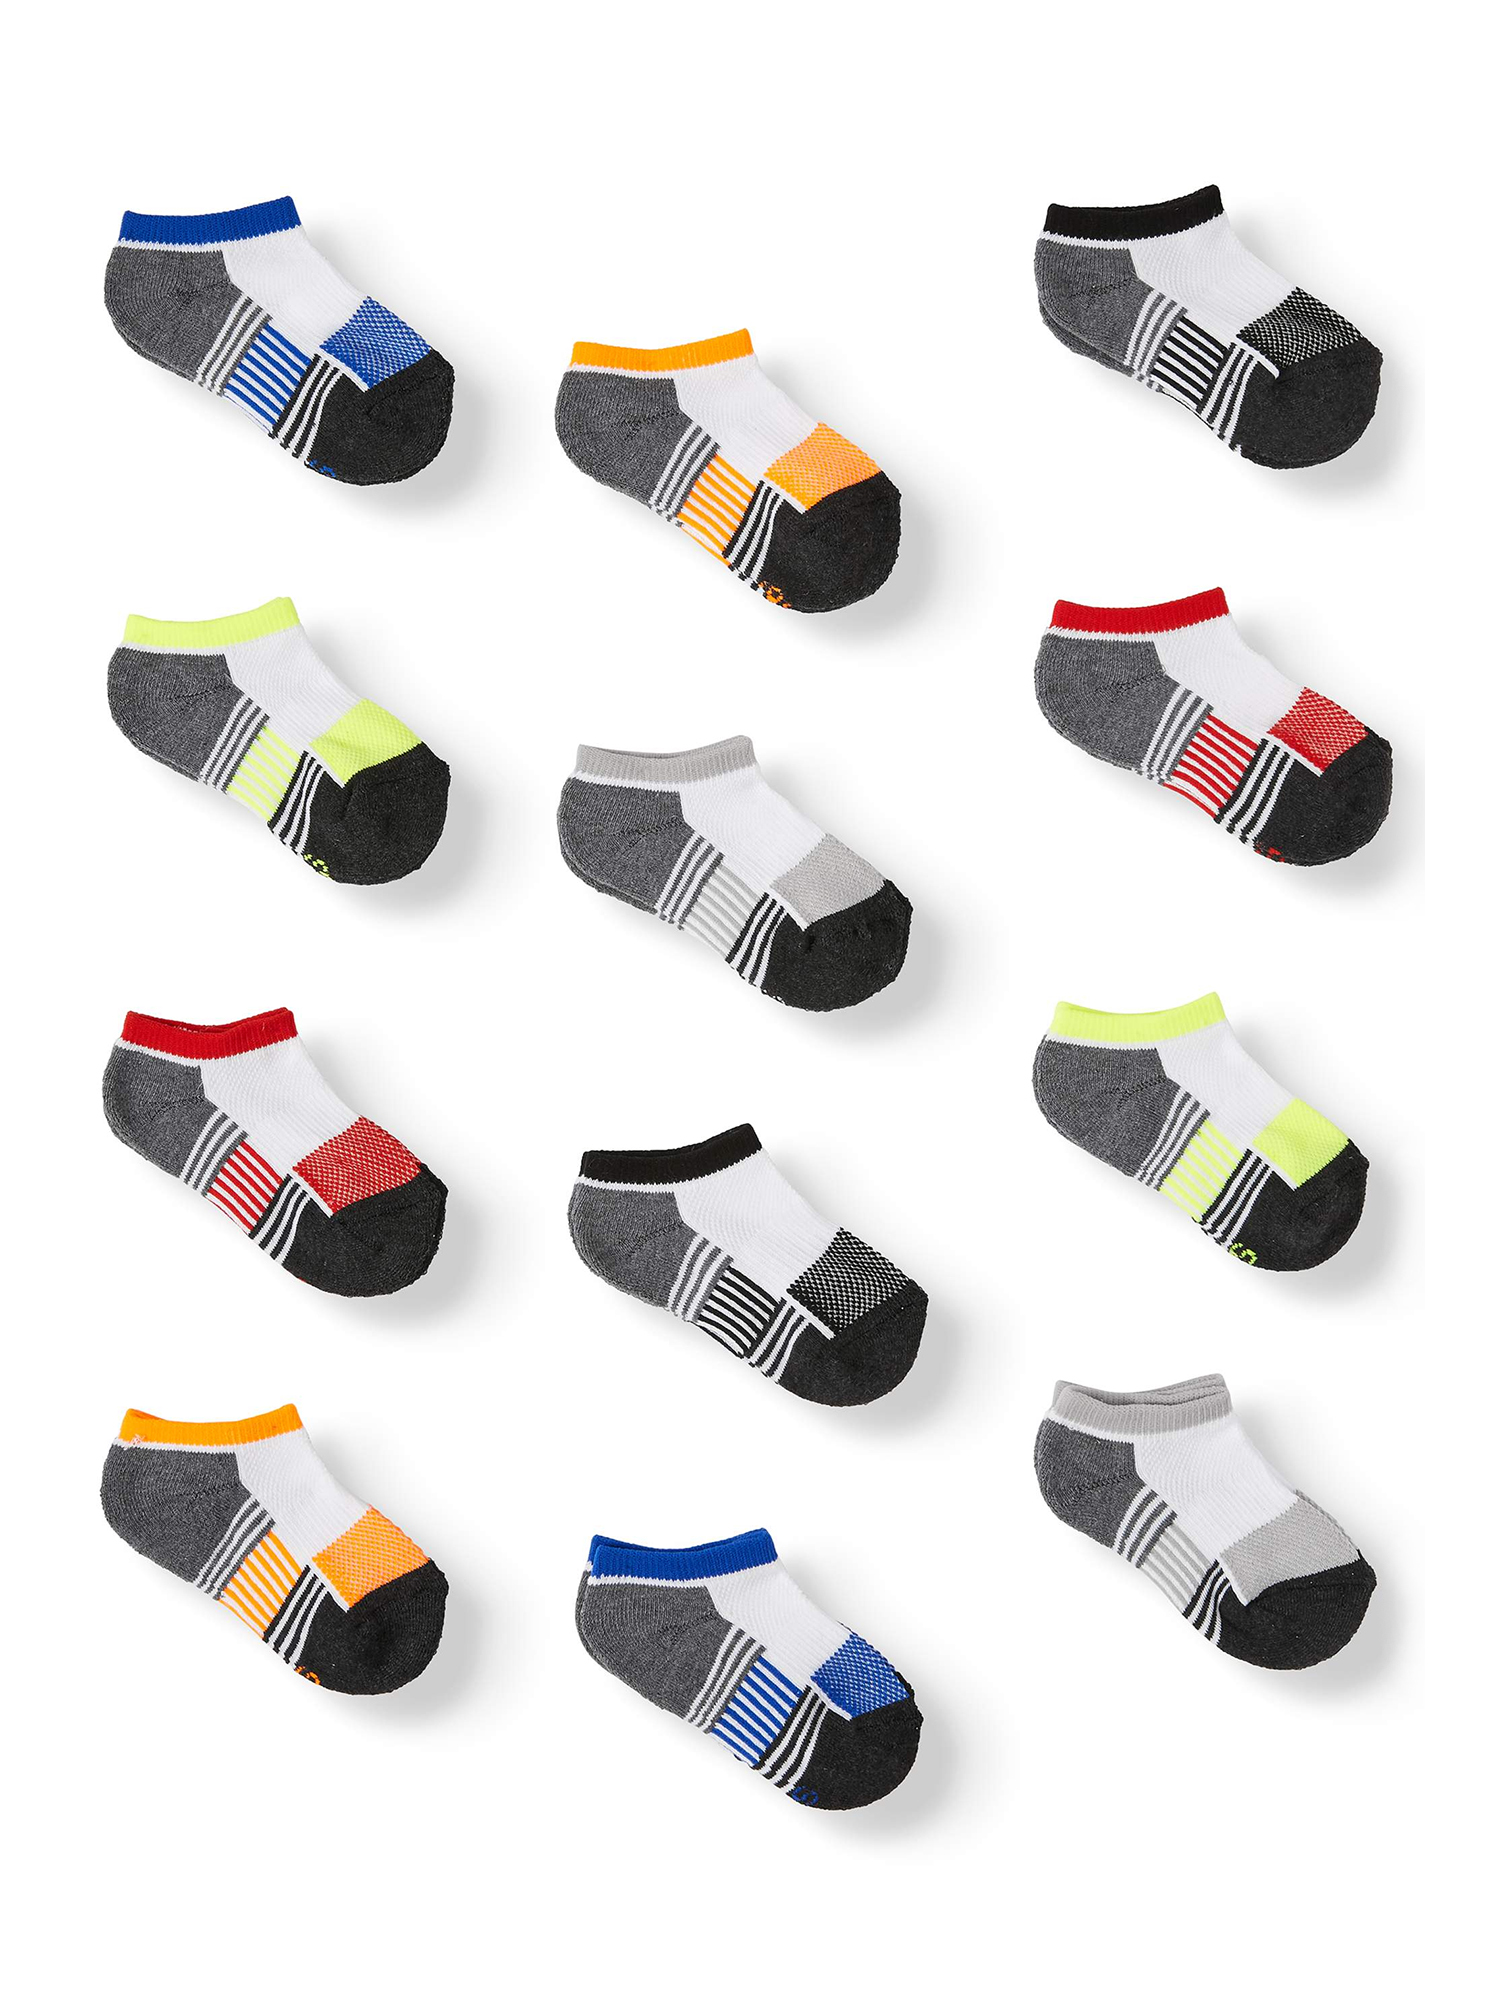 Athletic Works Boys Socks, 12 Pack Half Cushioned No Shows, Sizes S (4.5-8.5) - L (3-9) - image 1 of 3